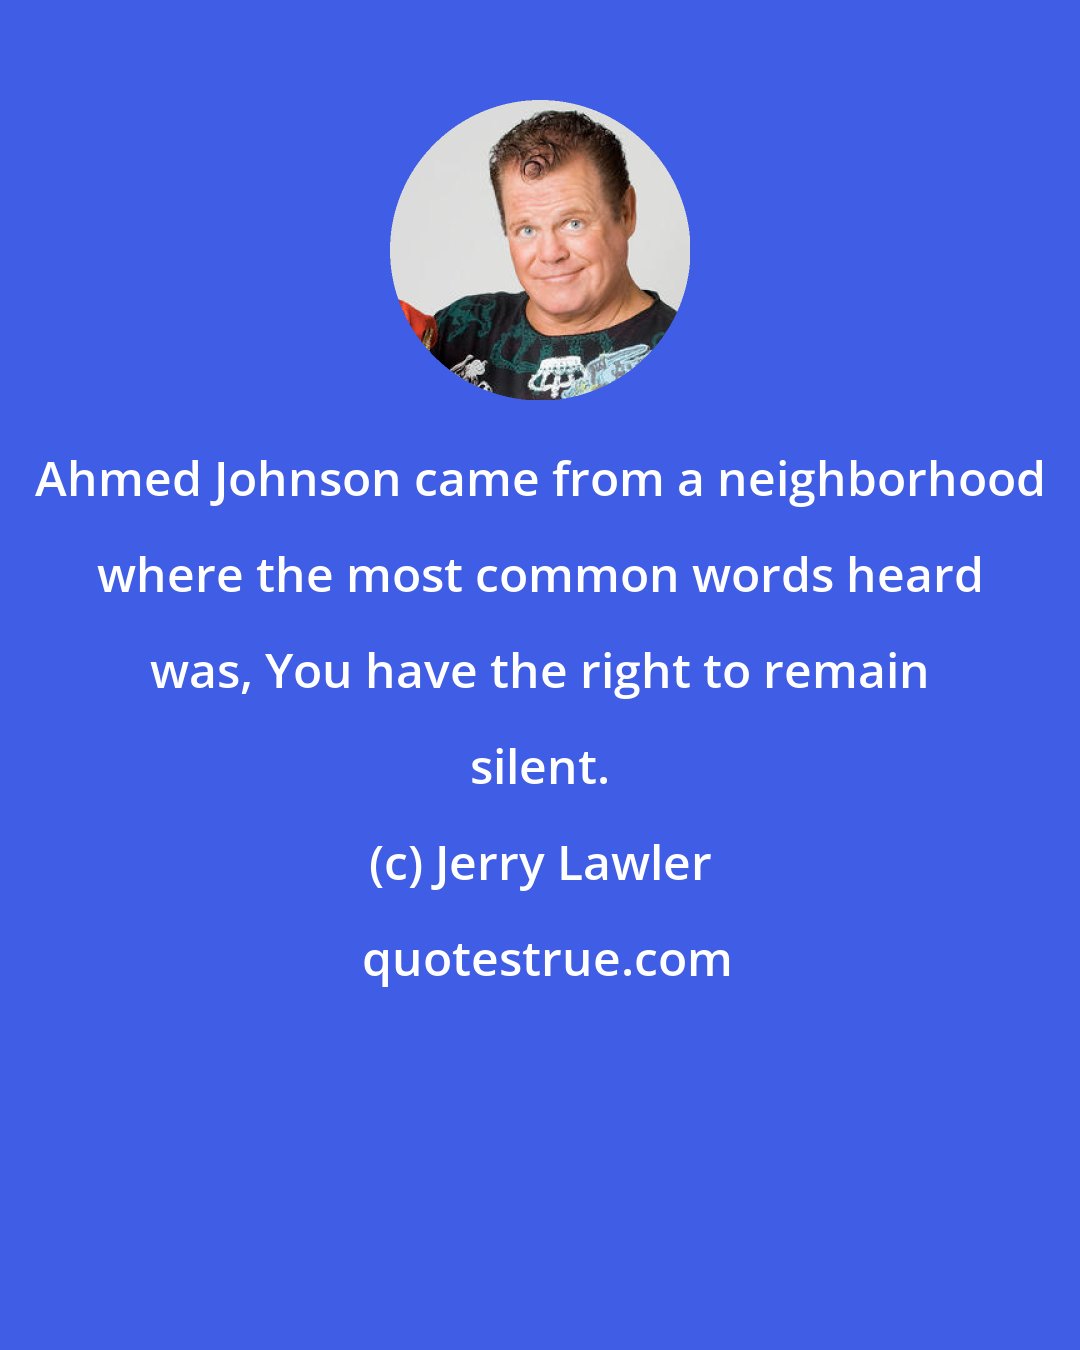 Jerry Lawler: Ahmed Johnson came from a neighborhood where the most common words heard was, You have the right to remain silent.